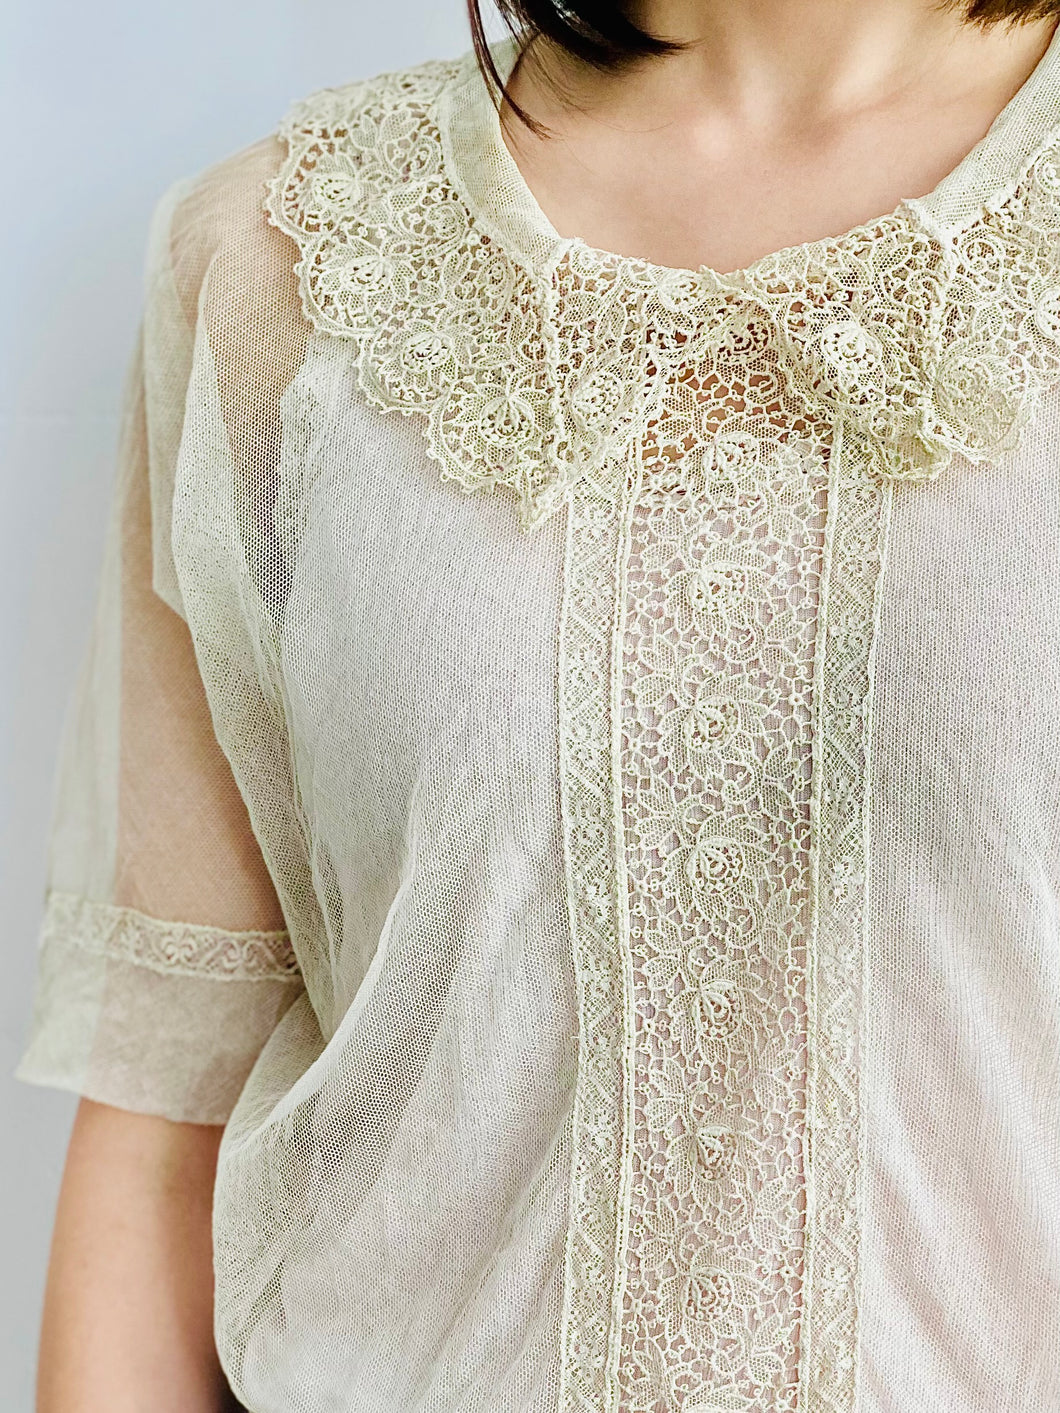 1920s Tulle Chemical Lace Top Intricate Collar